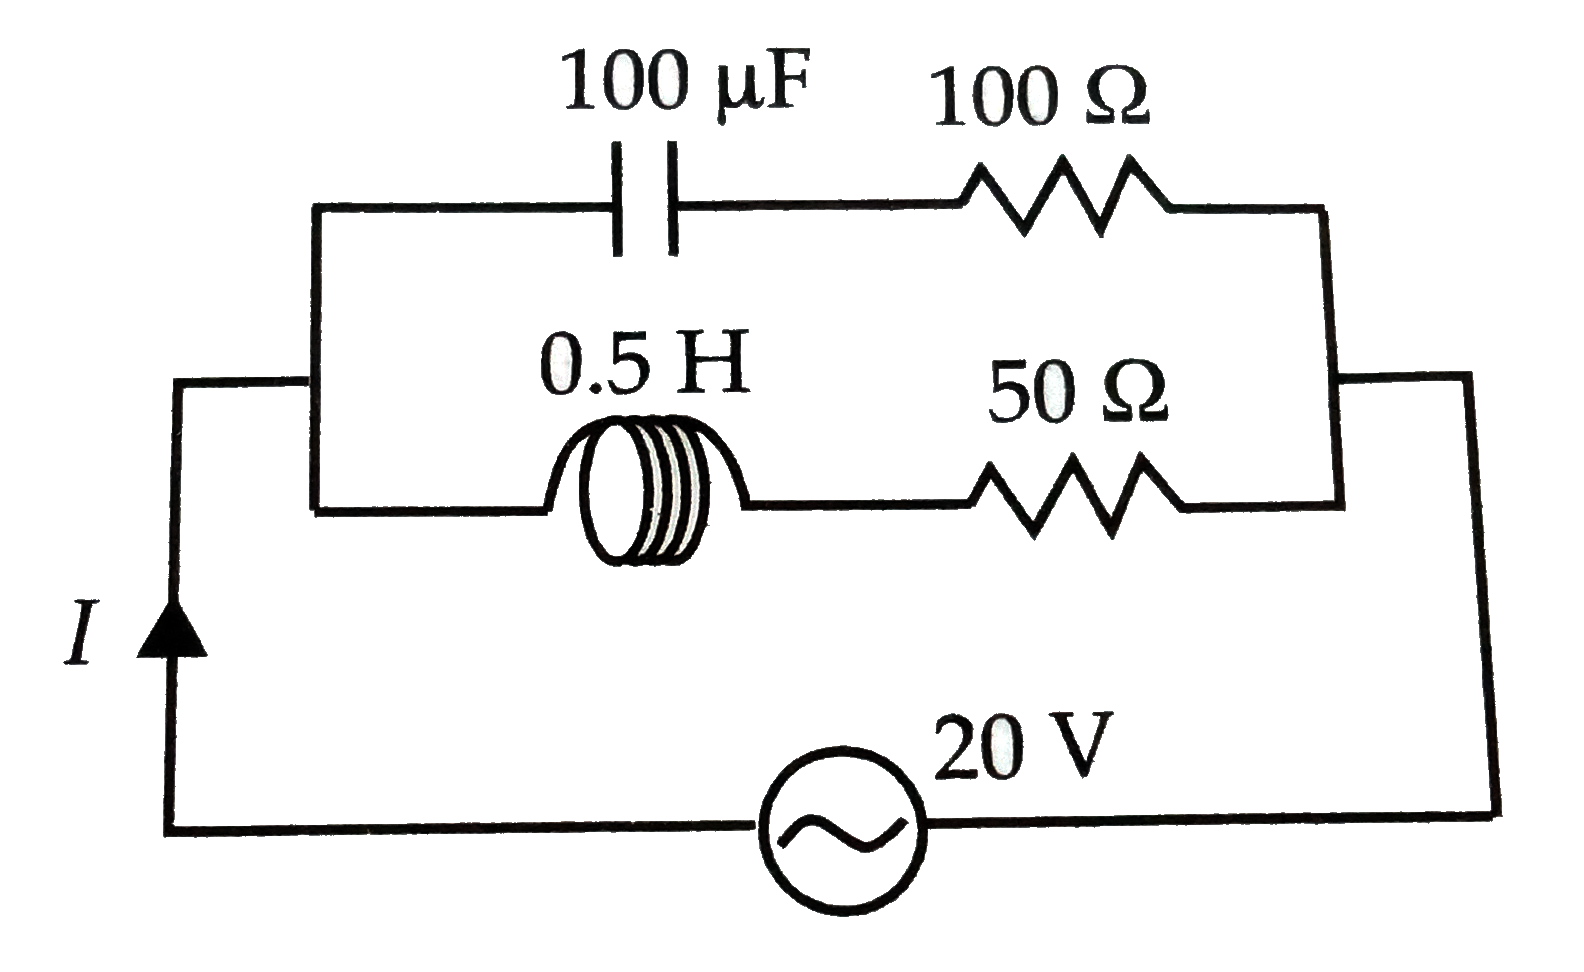 In the given circuit, the AC source has omega=100 red/s. Considering the inductor and capacitor to be ideal, the correct choice is